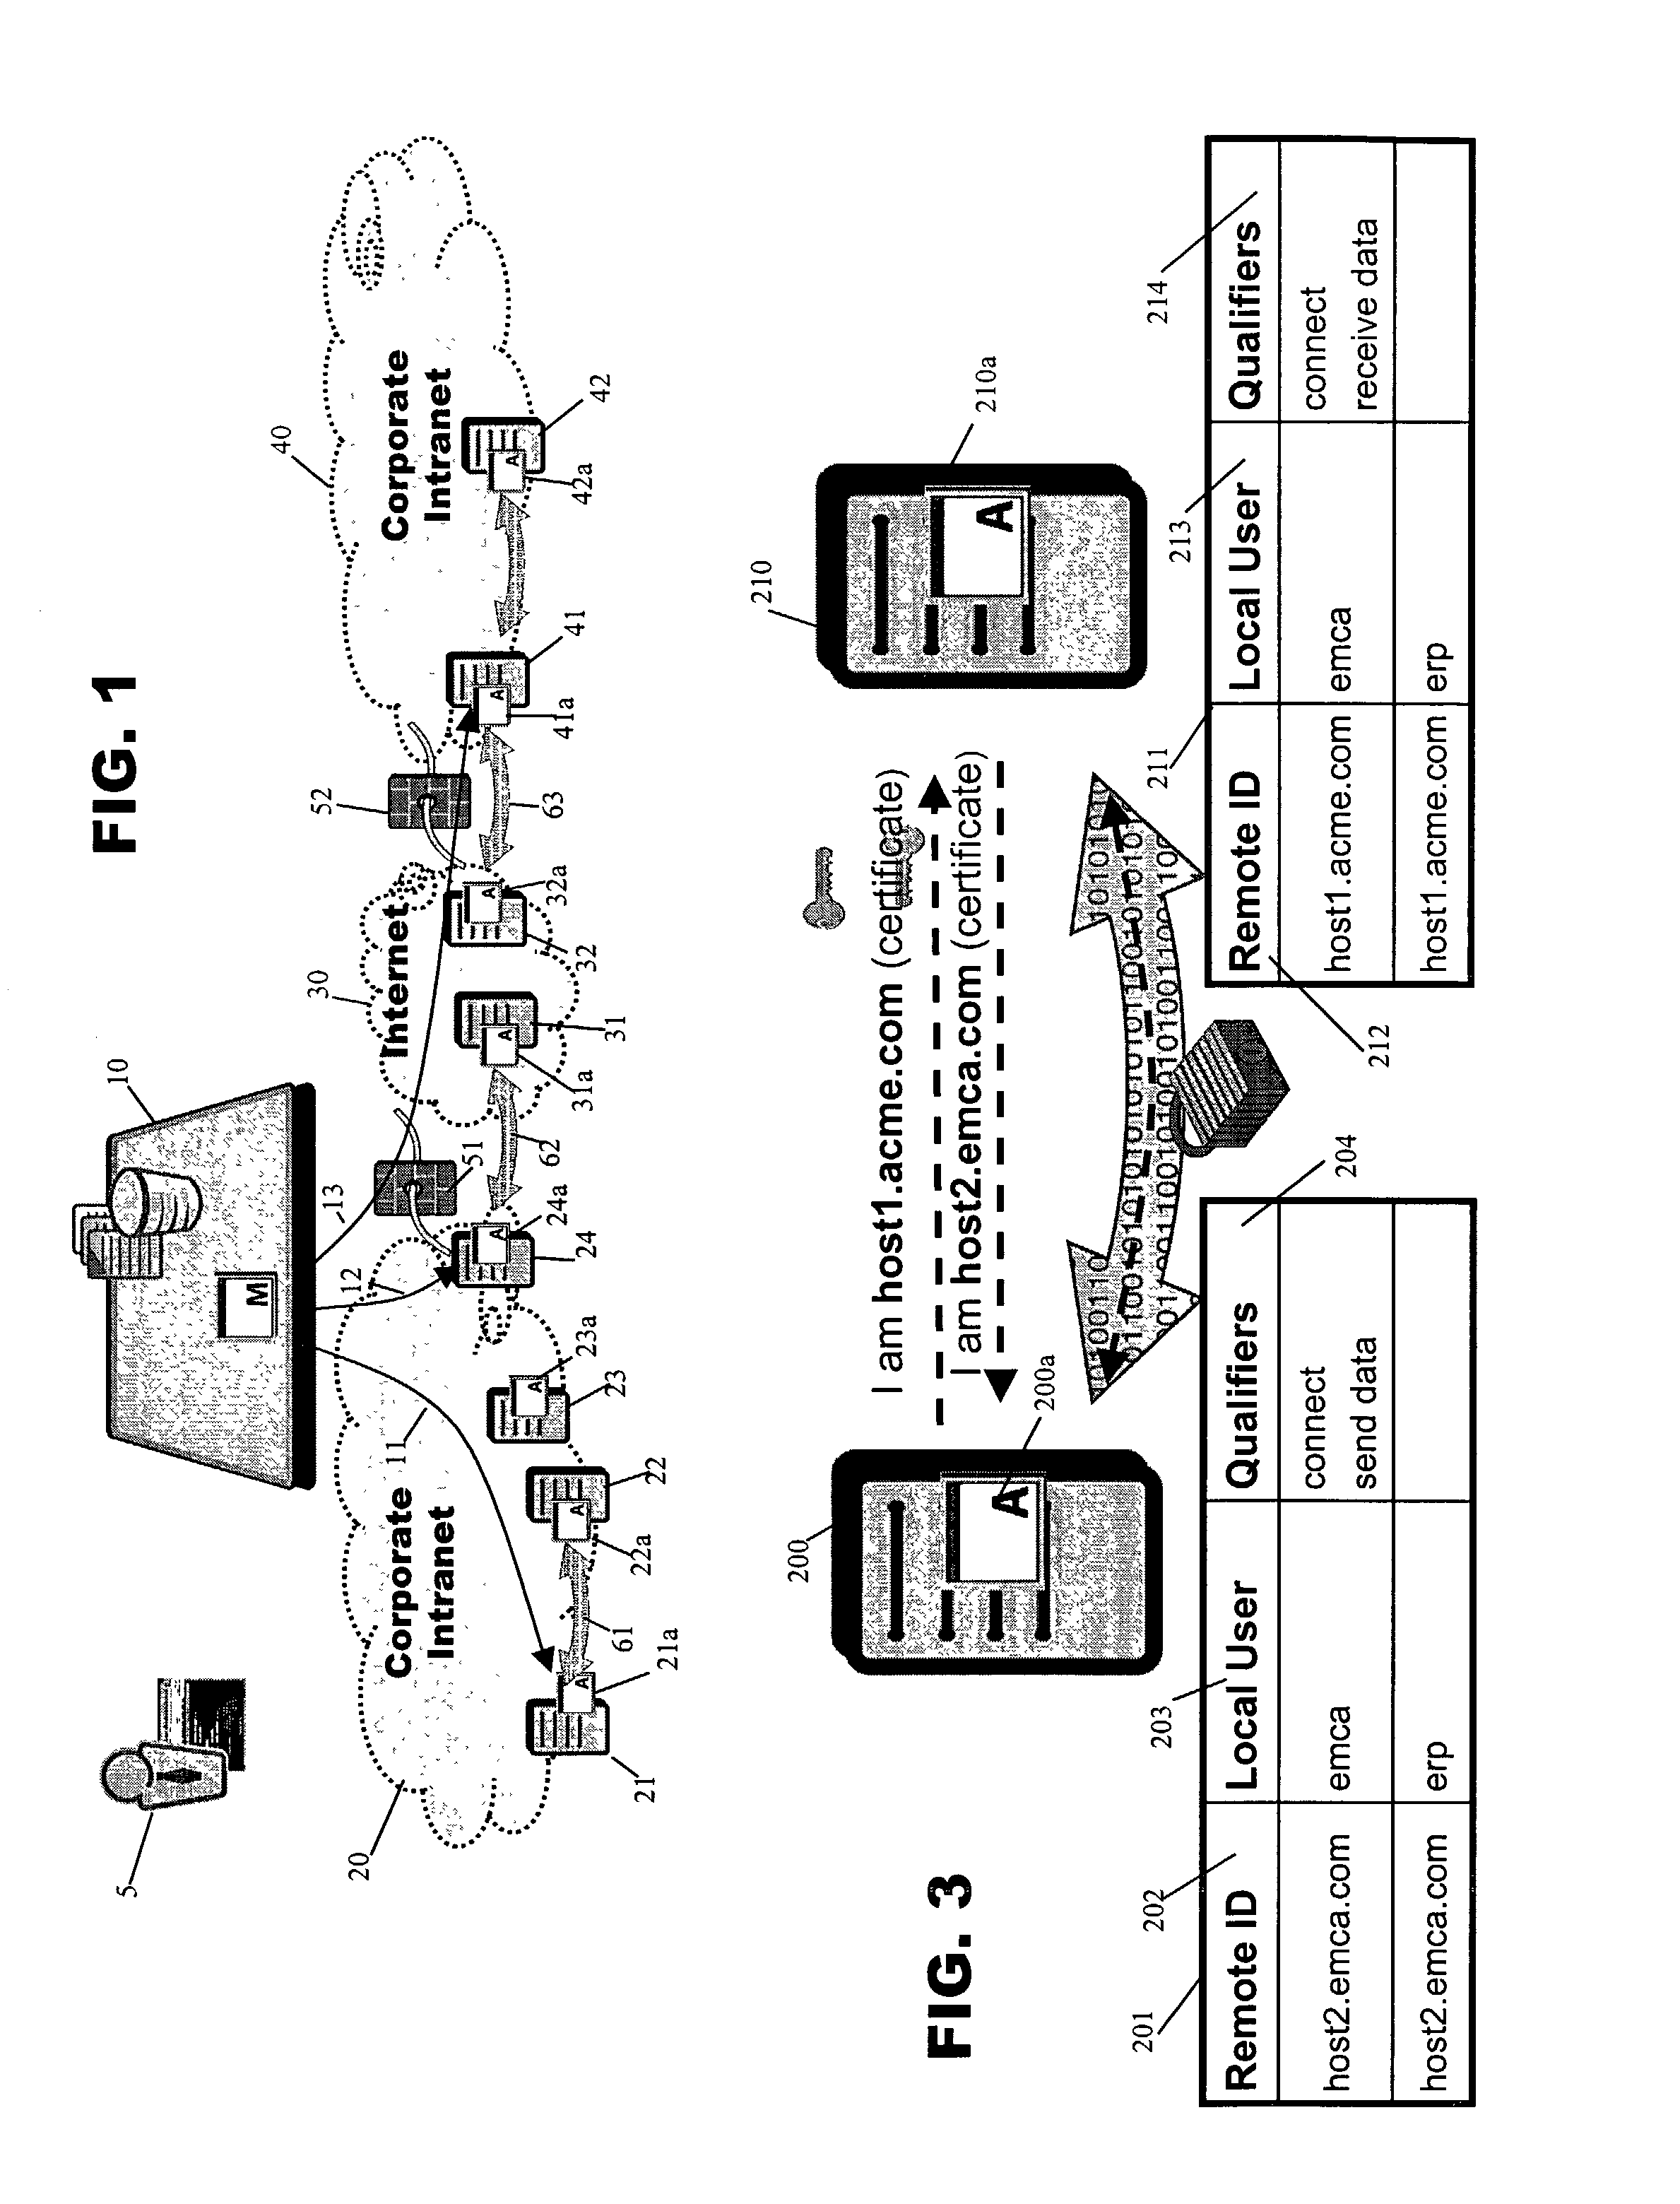 Data transfer system and method with secure mapping of local system access rights to global identities